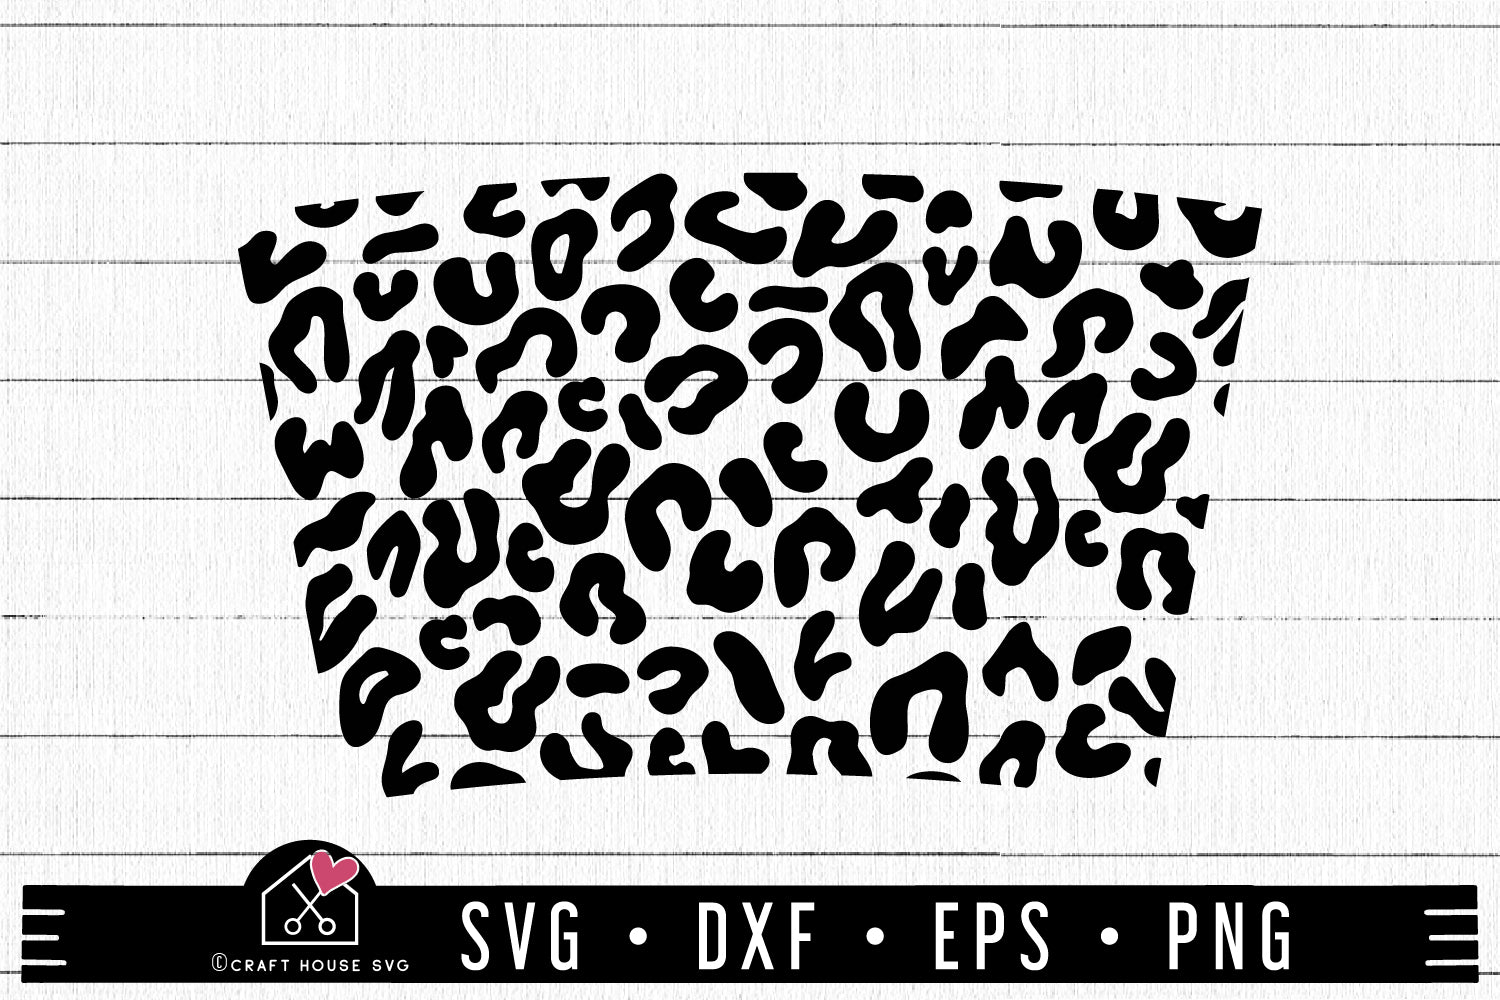 Cup wrap SVG PNG DXF EPS - free svg files for cricut